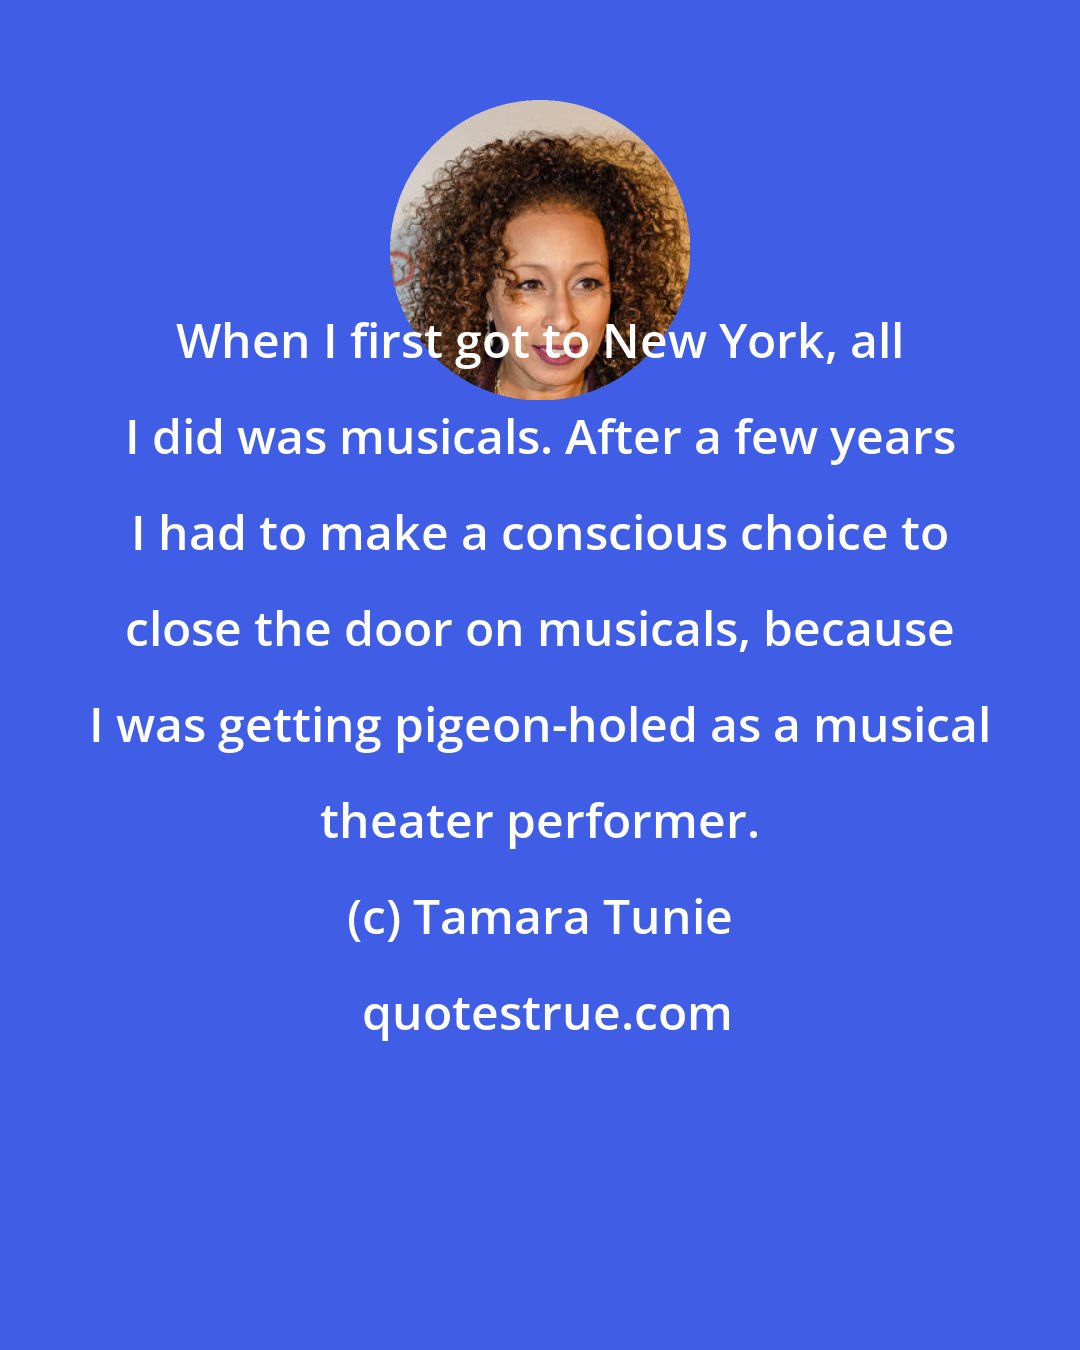 Tamara Tunie: When I first got to New York, all I did was musicals. After a few years I had to make a conscious choice to close the door on musicals, because I was getting pigeon-holed as a musical theater performer.